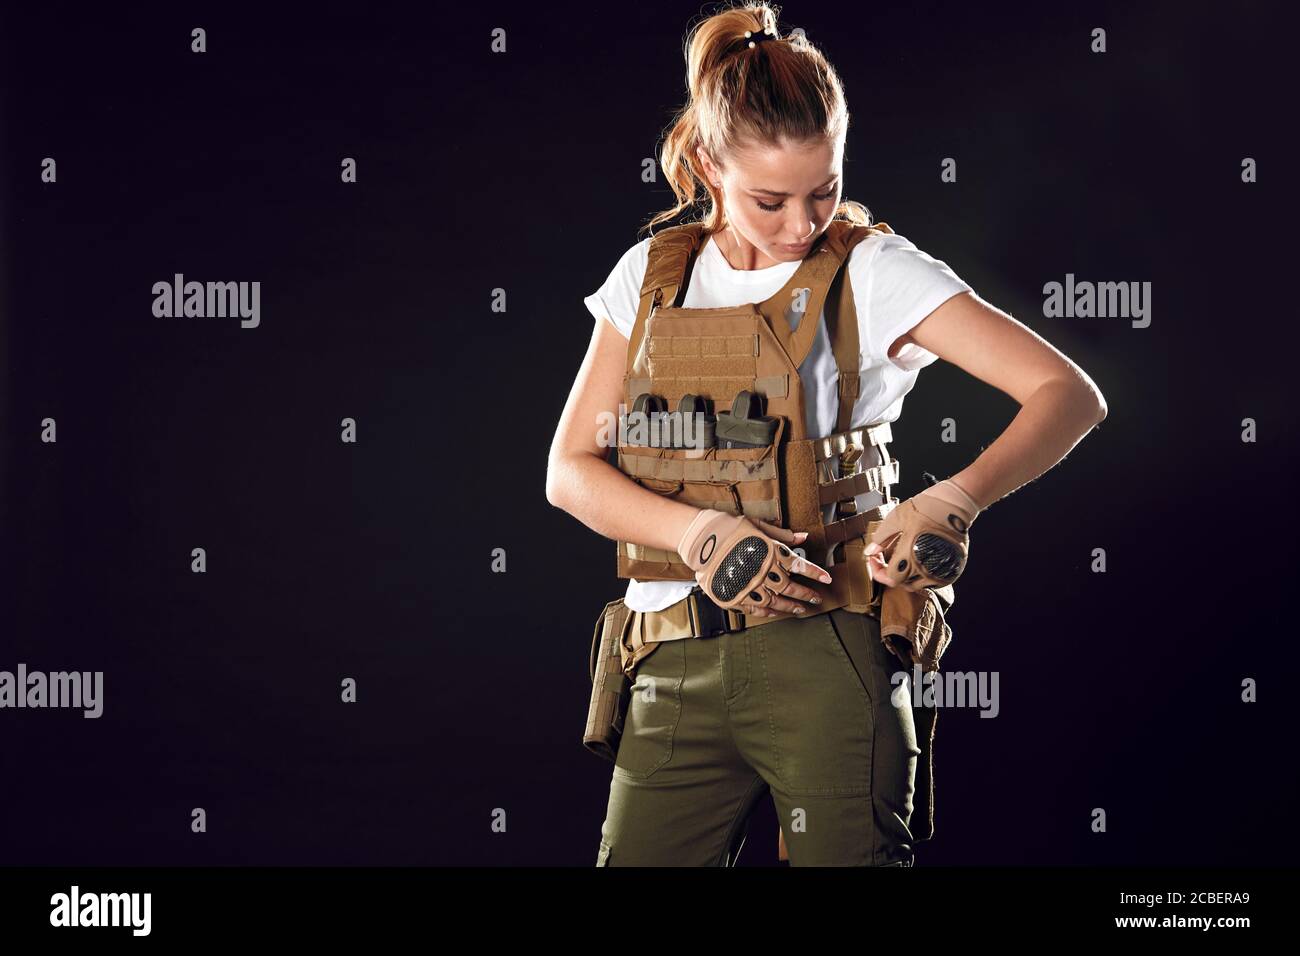 Gorgeous young woman with long blonde hair wearing Military gear, posing isolated in studio over dark background Stock Photo